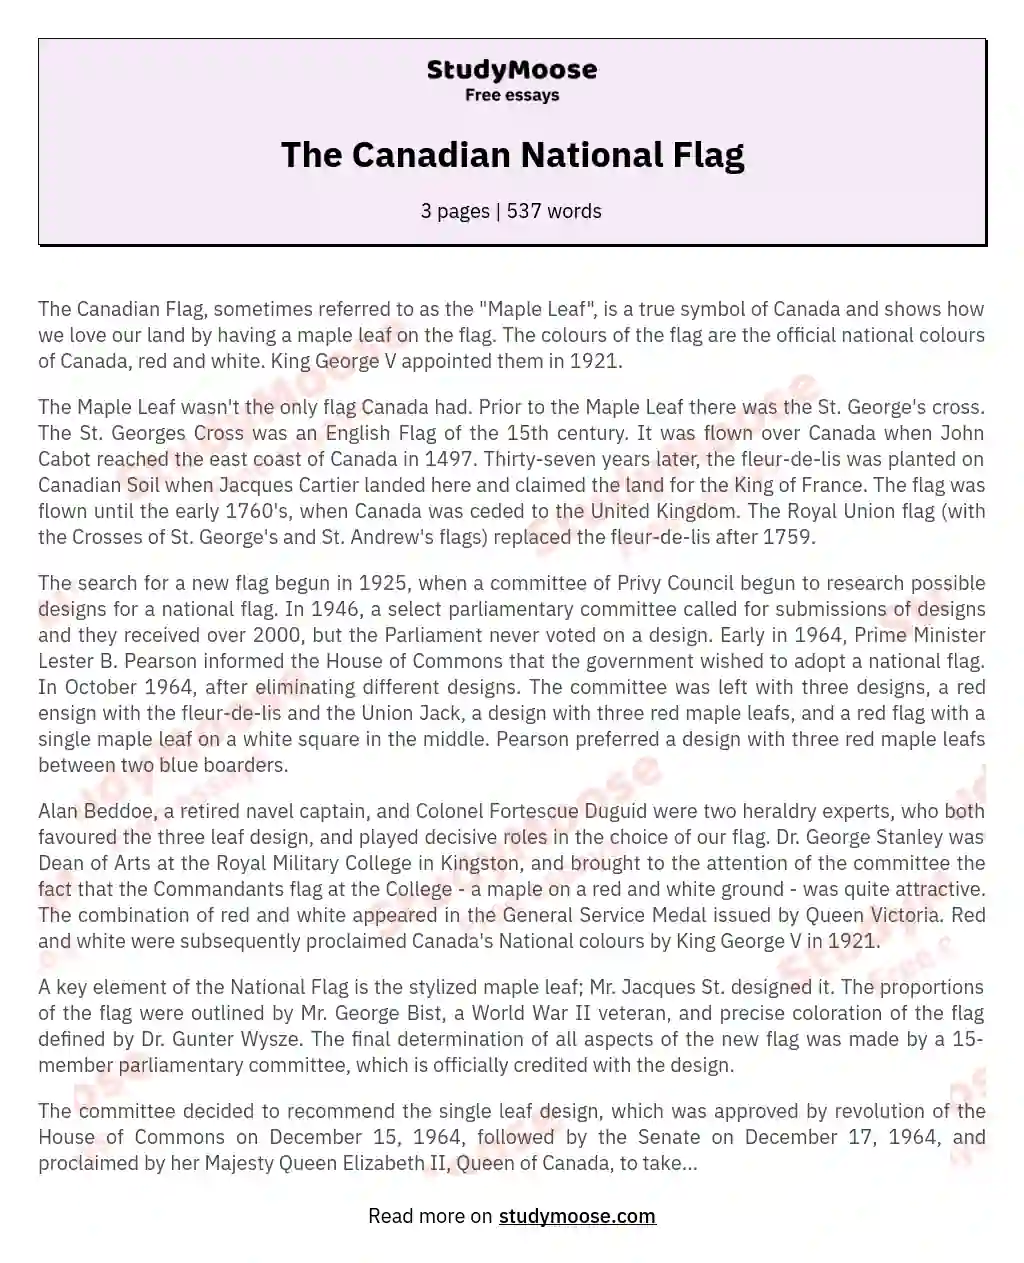 The Canadian National Flag essay